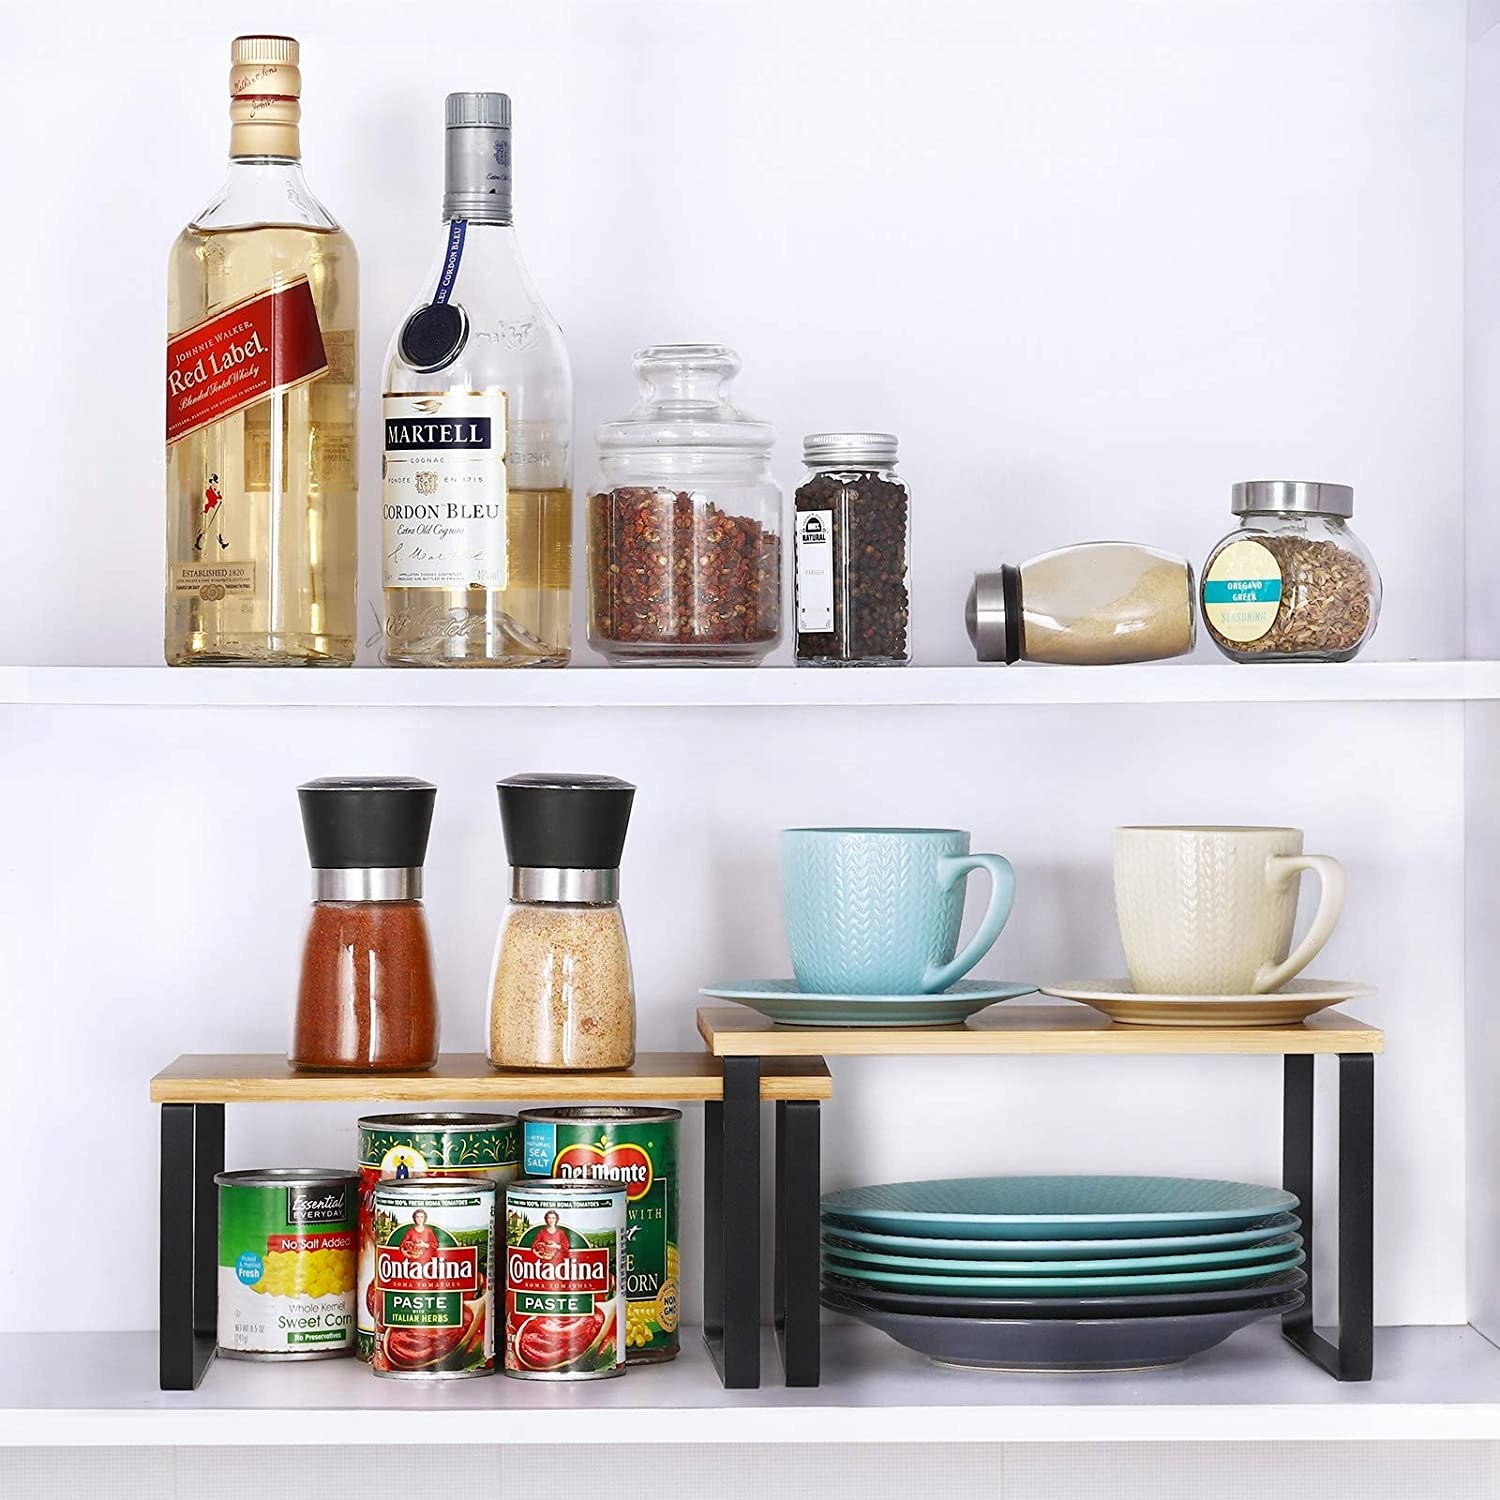 two mini shelves on a larger shelf organizing plates and food